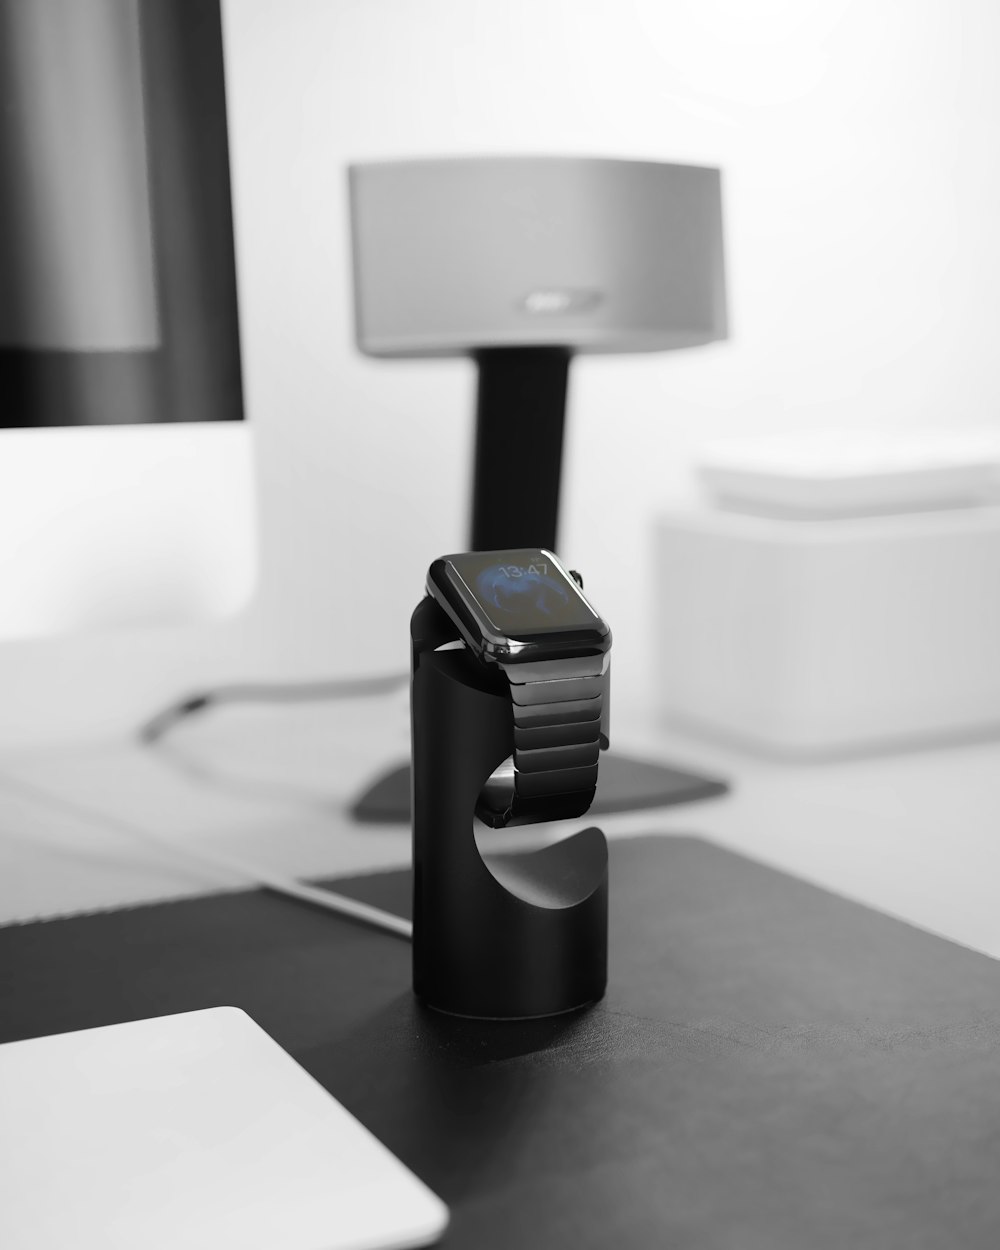 space black case Apple Watch on magnetic charger